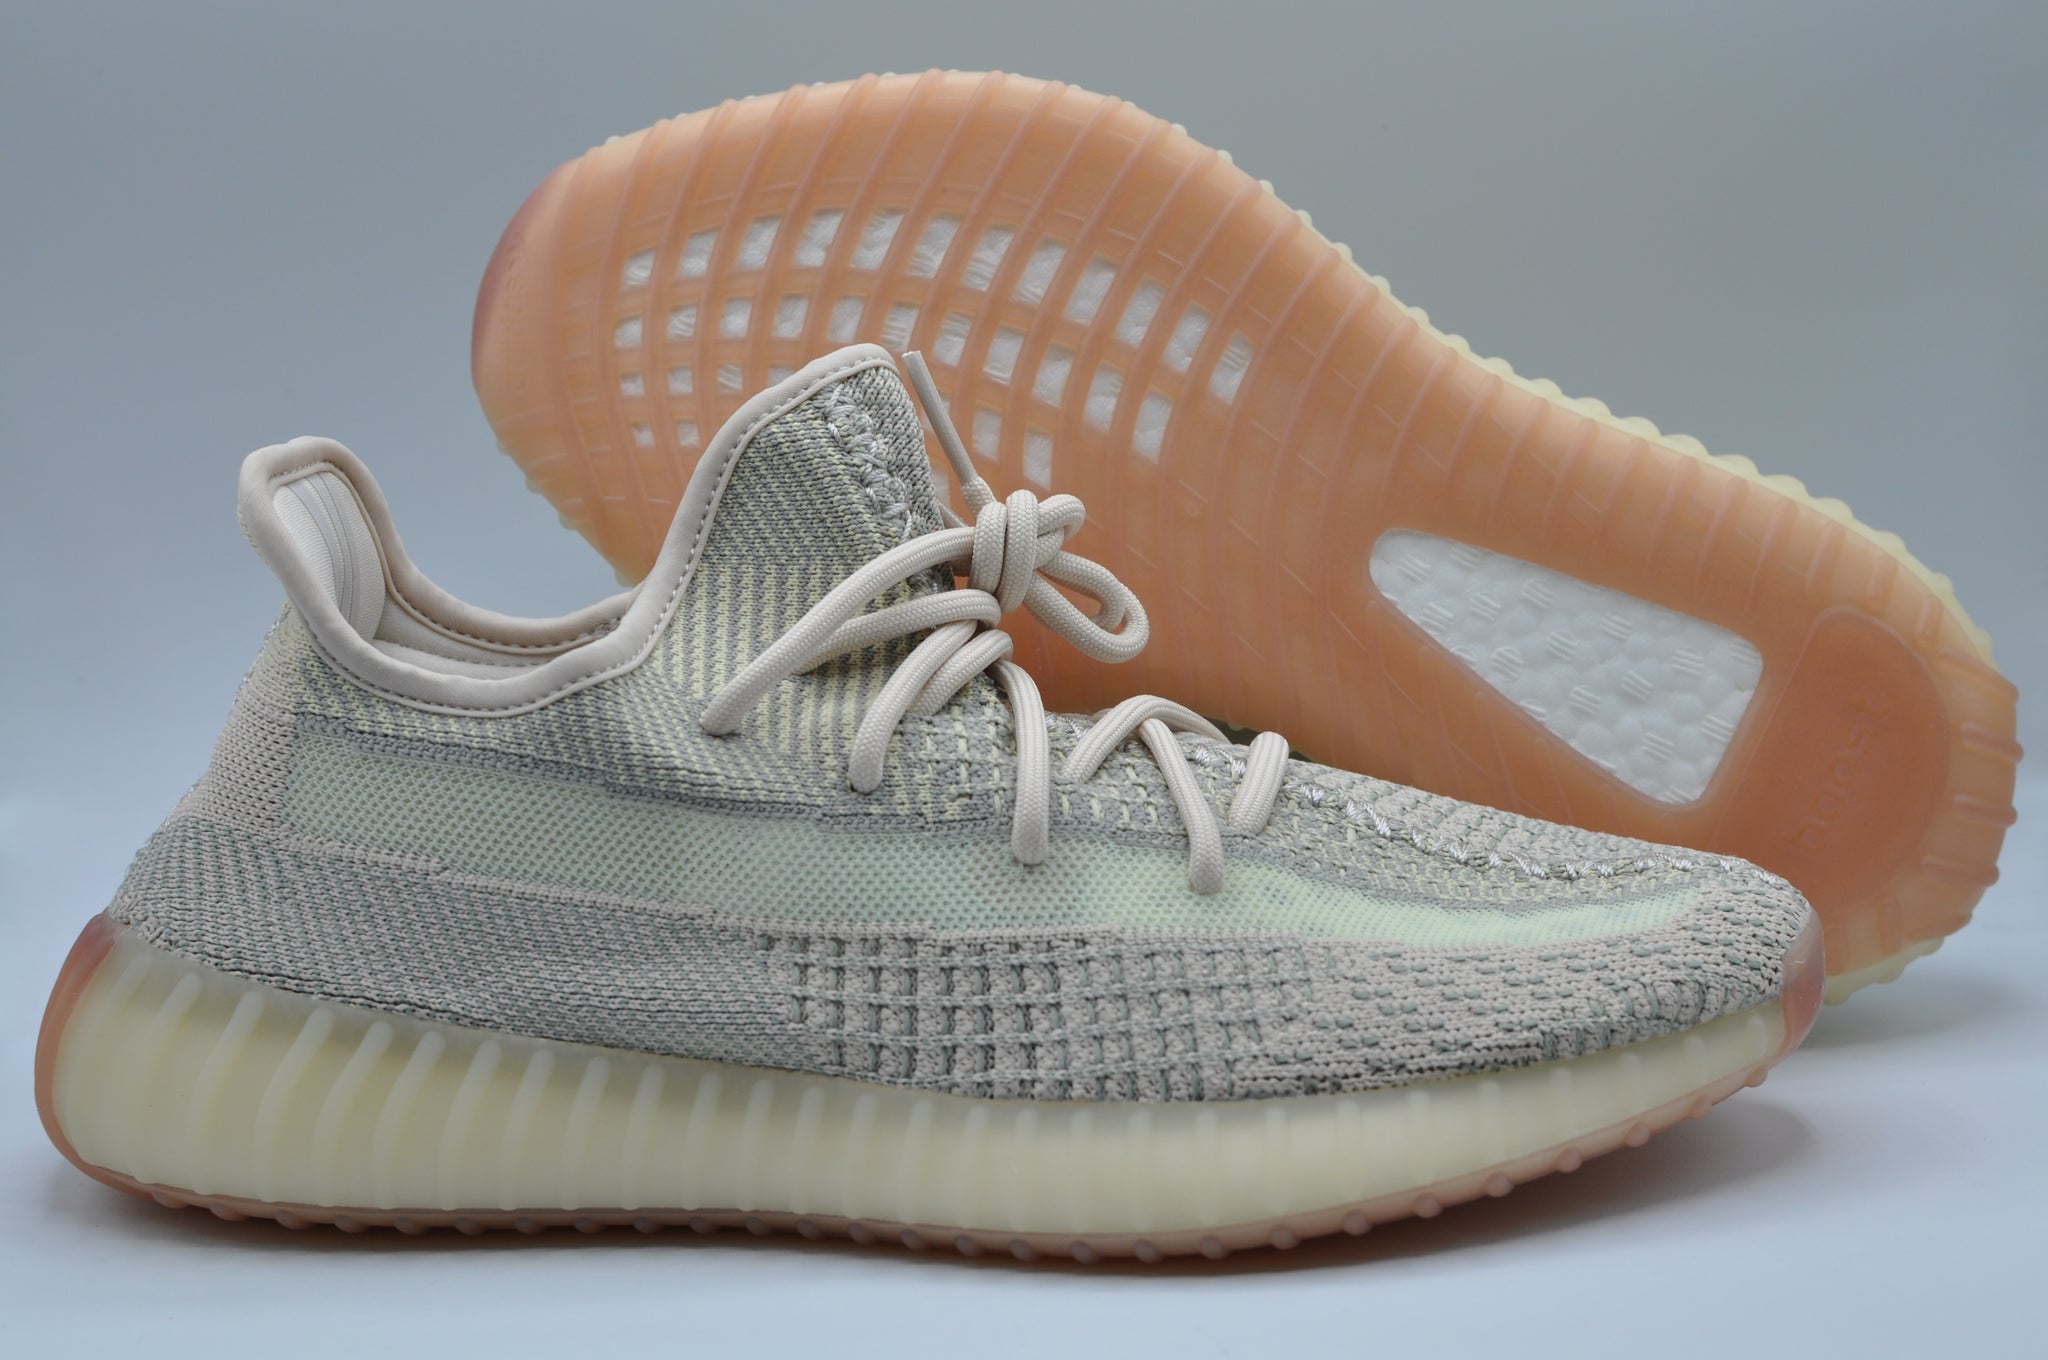 Adidas Yeezy Boost 350 Citrin (non-reflective) 21 Sneakers LLC